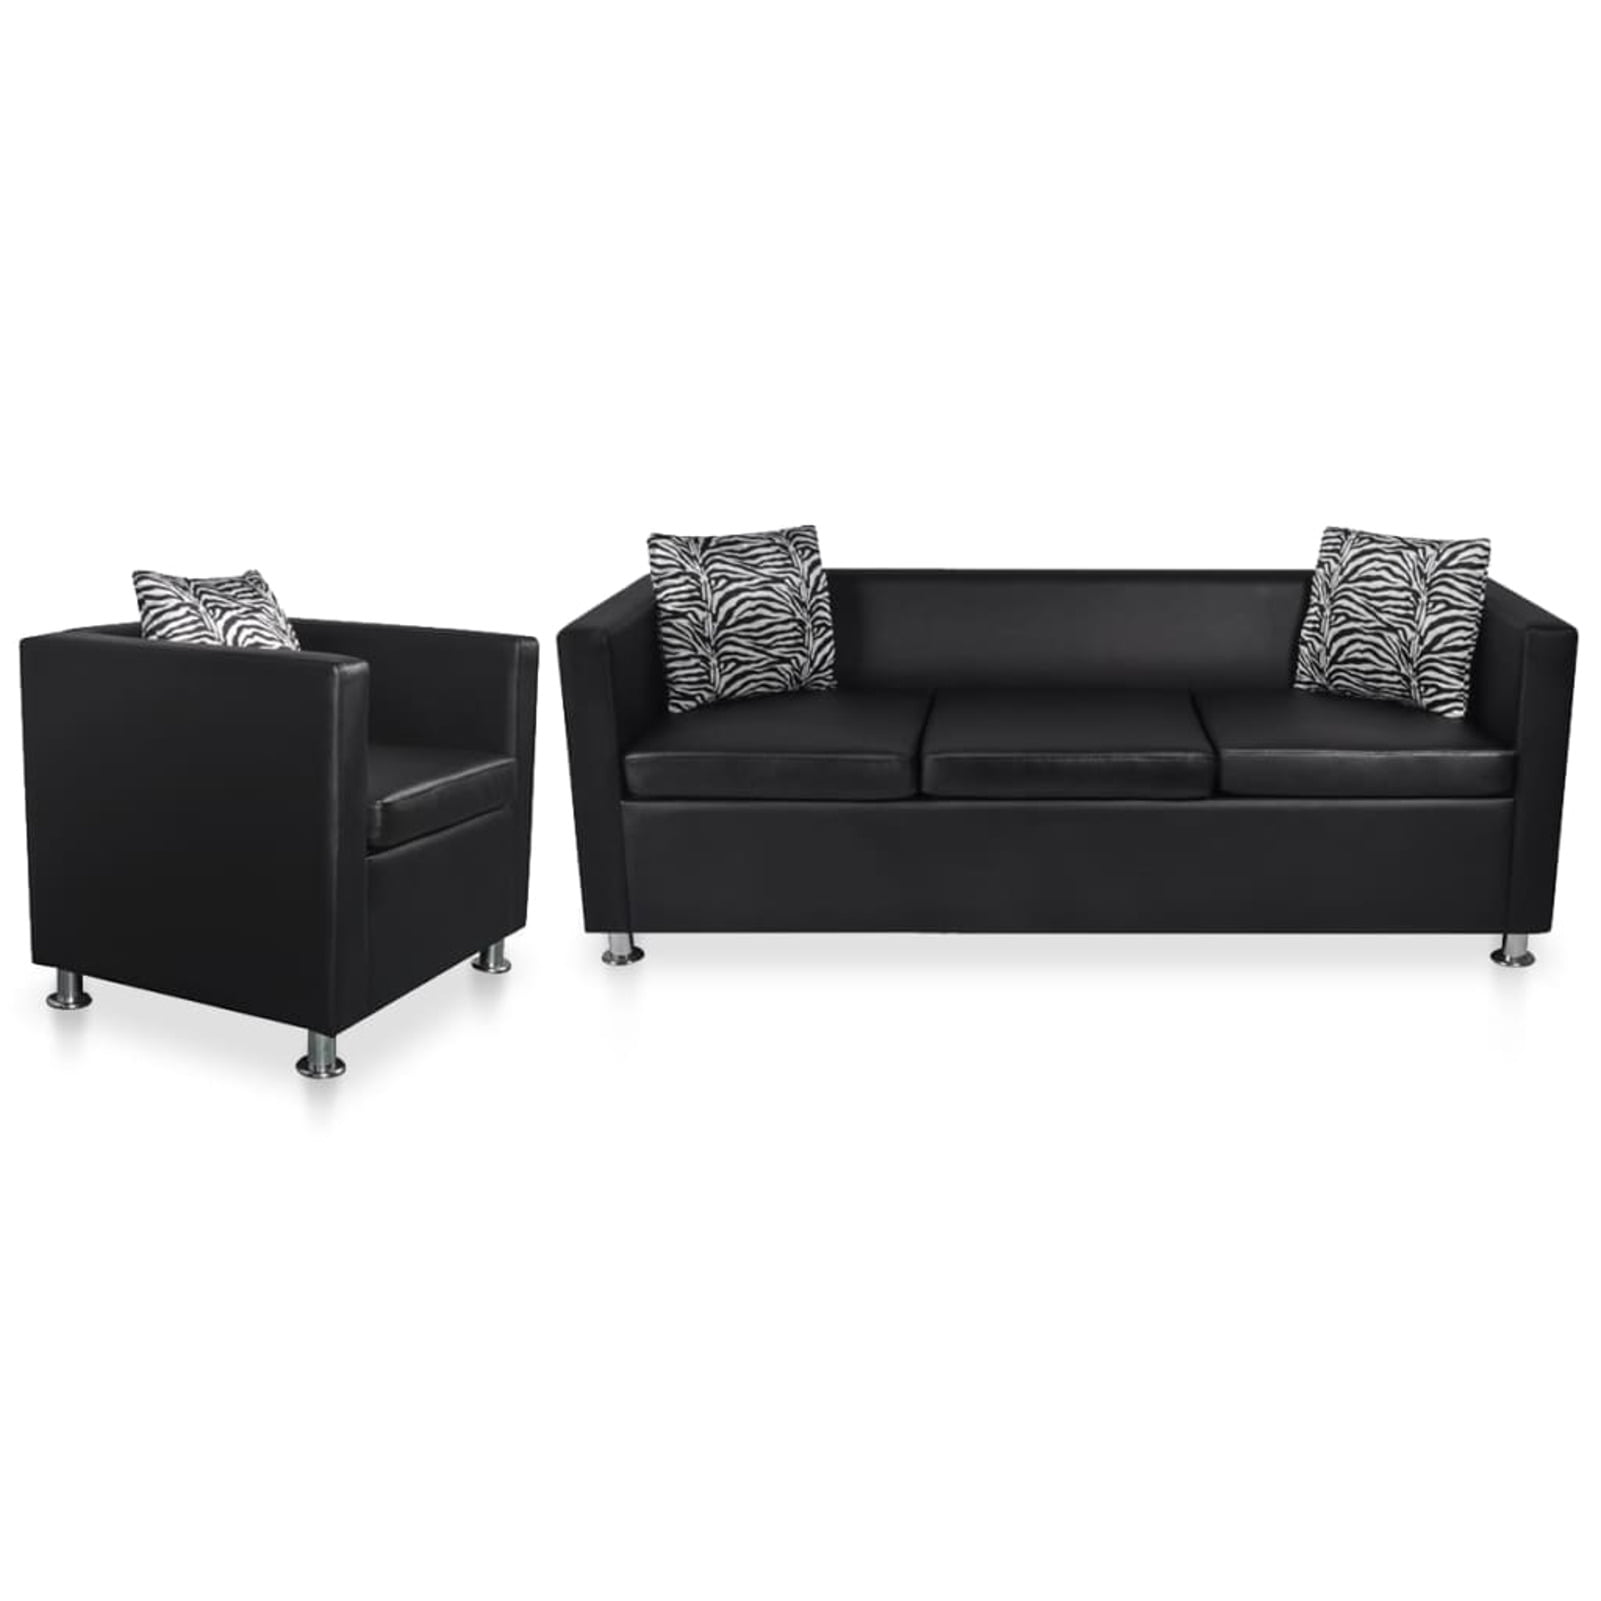 Sofa Set Armchair And 3 Seater Couch, Black Leather 3 Seater Chaise Lounge